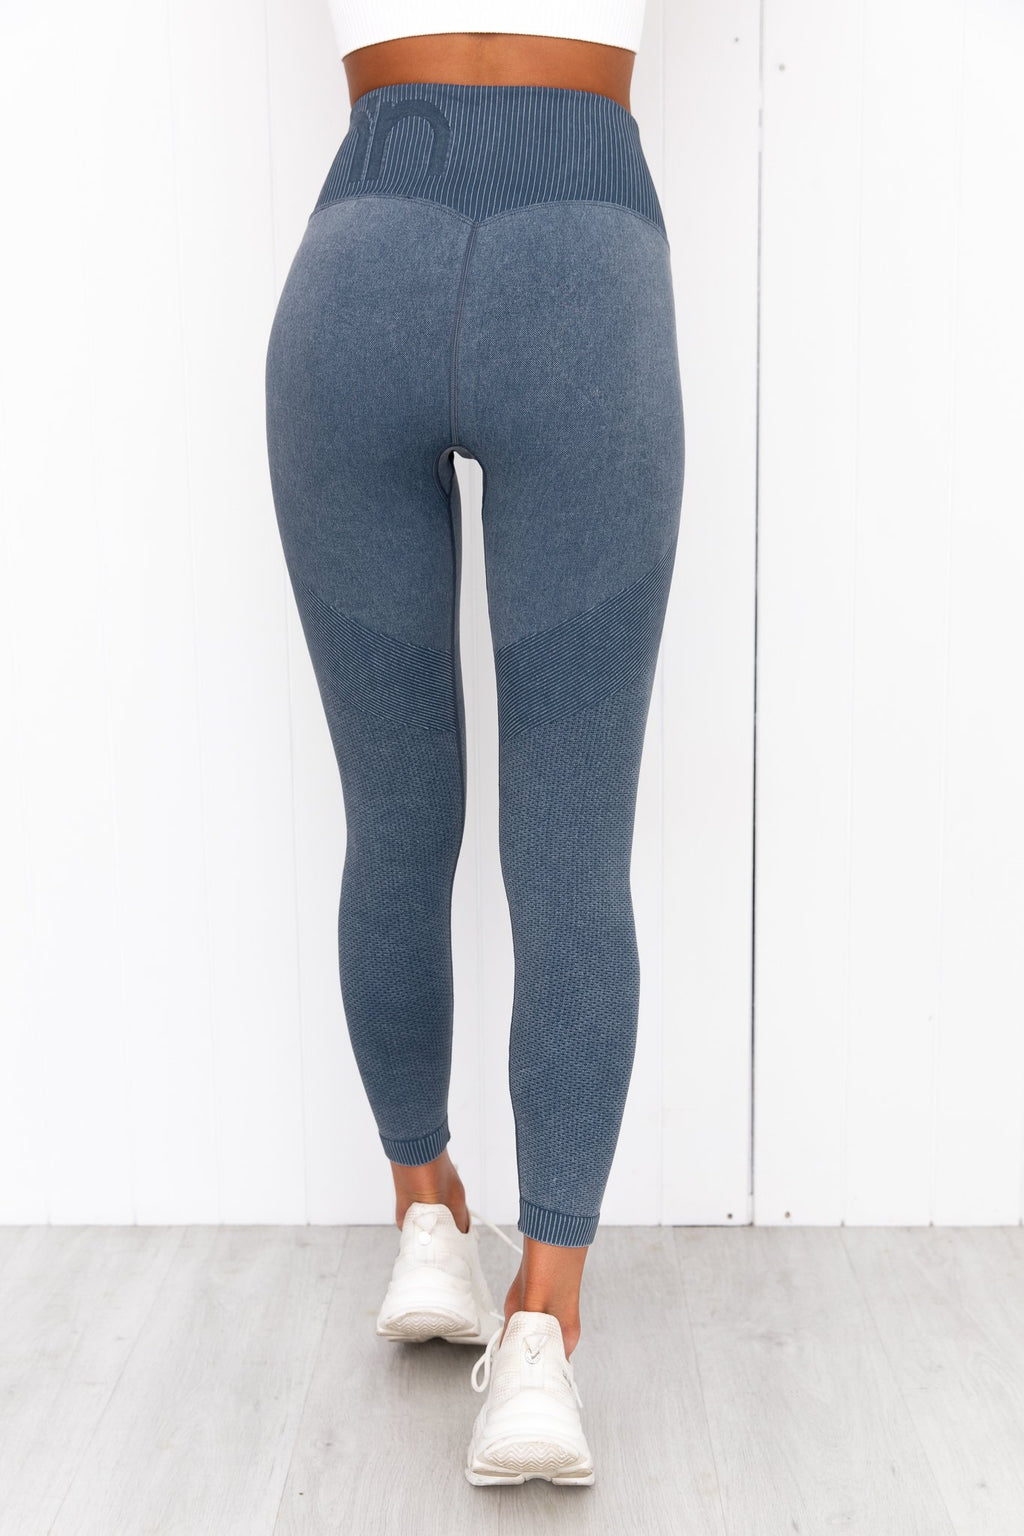 Ocean Washed Seamless Tights